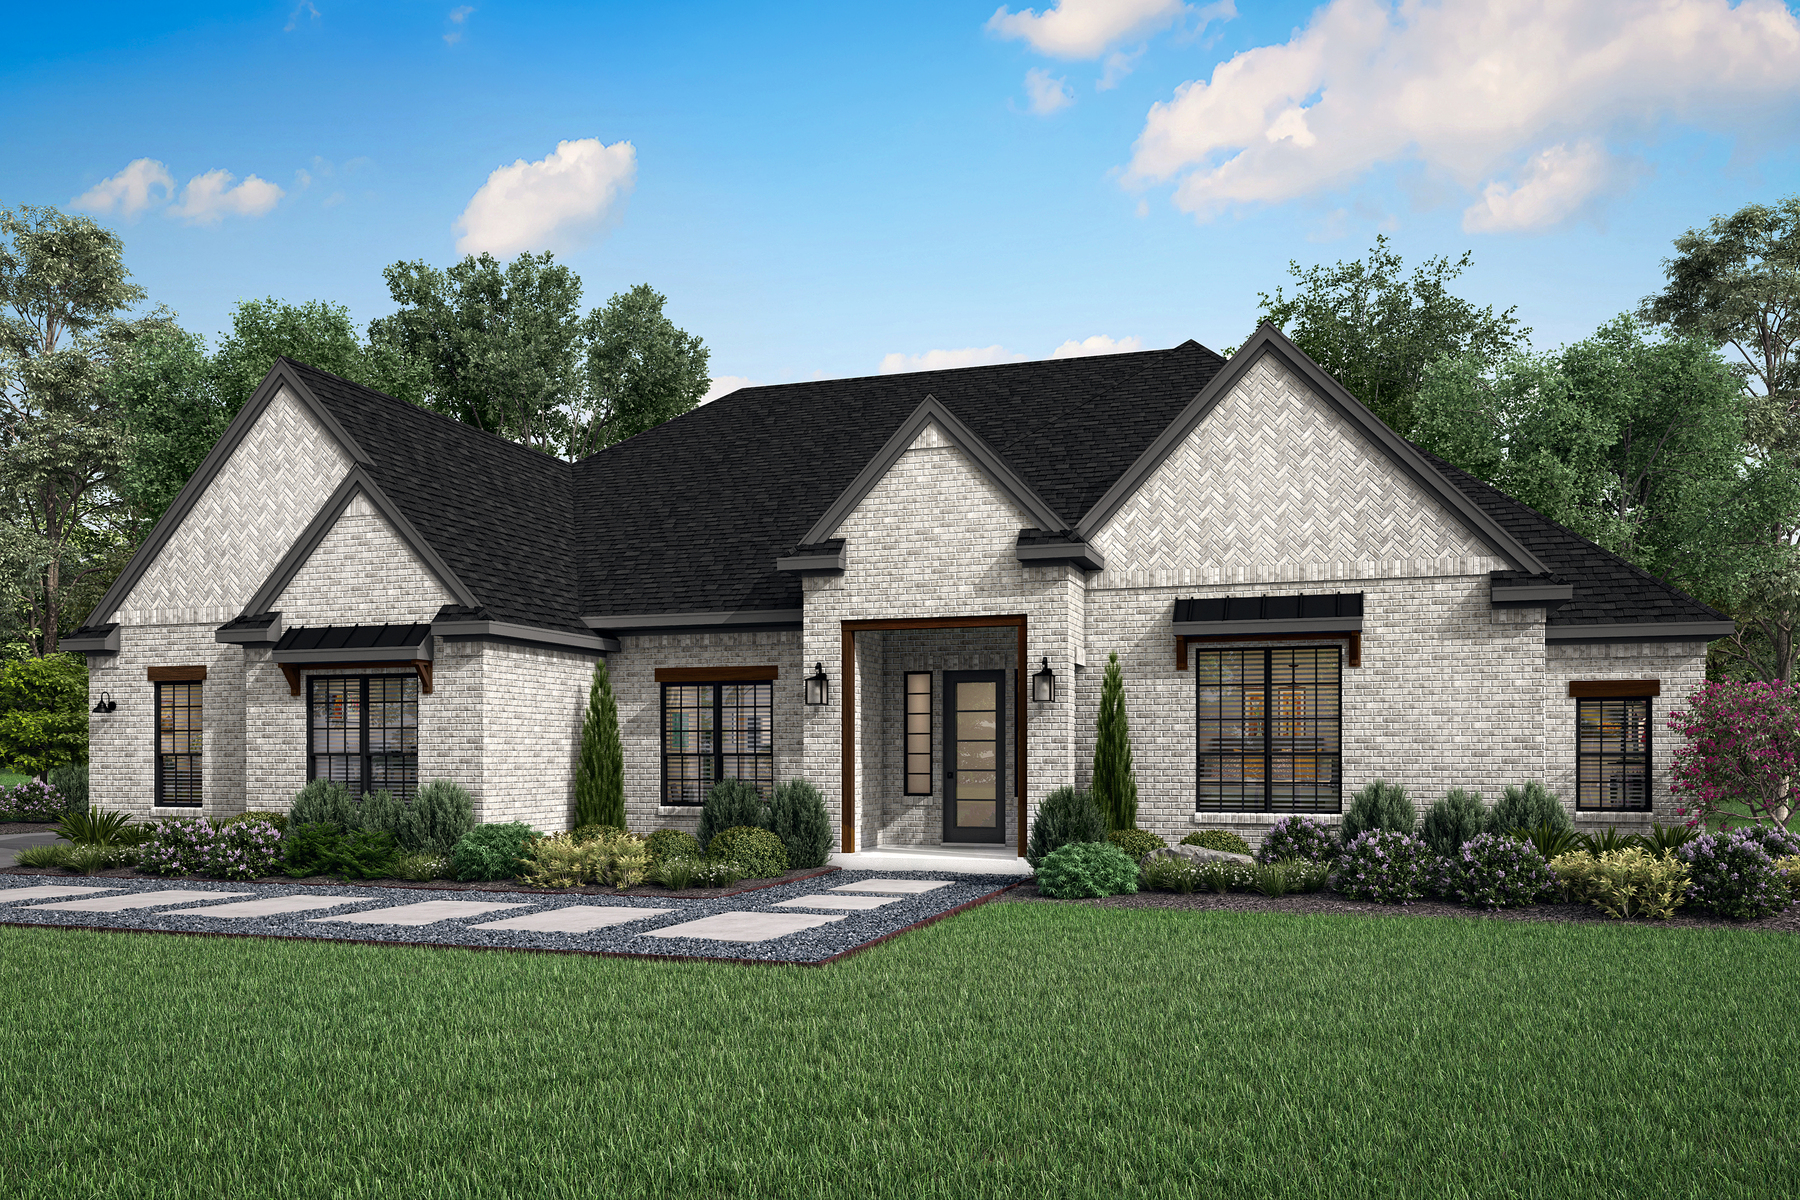 The Mantle plan is a stunning, single-story home offered at Van Buren Estates by Terrata Homes.